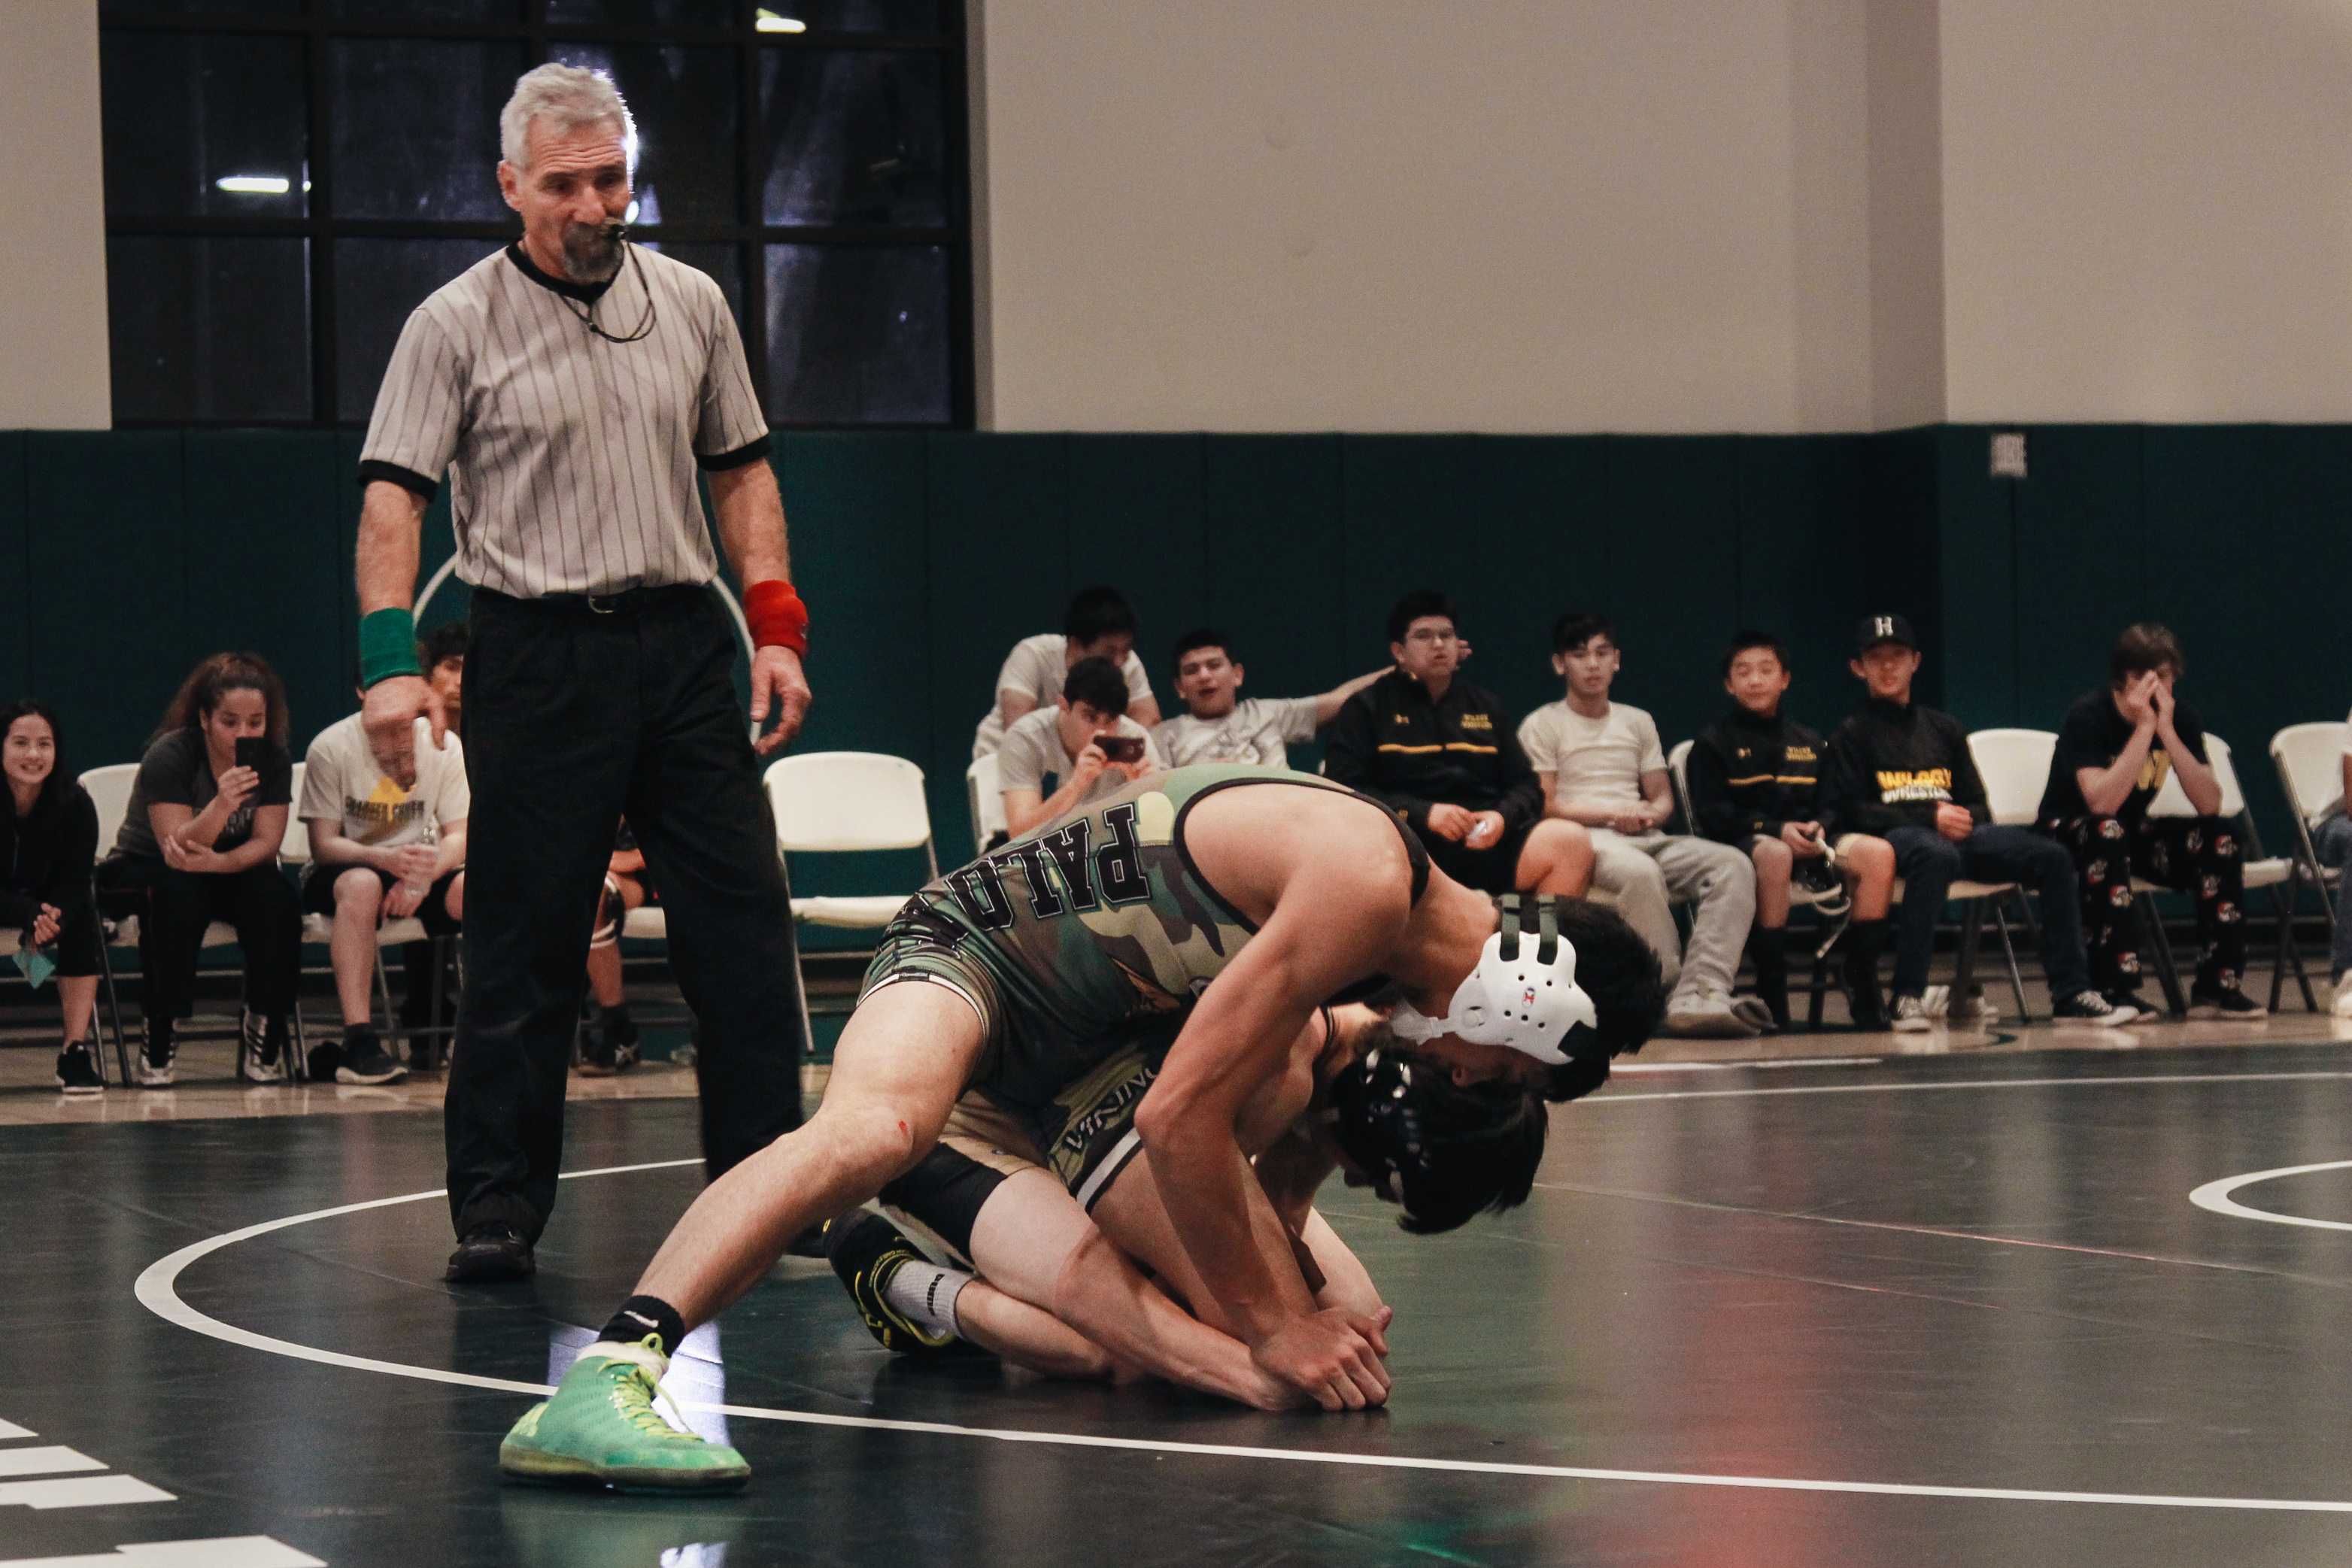 Palo Alto High School senior and co-captain Calvin Grewal pins down his opponent at a dual meet against Fremont High School. Though Grewal won his match, the team did not do as well, finishing 43-31. "We just have to keep going, keep our heads up, and keep fighting," coach Jonathan Kessler said. Photo: Angelina Wang.